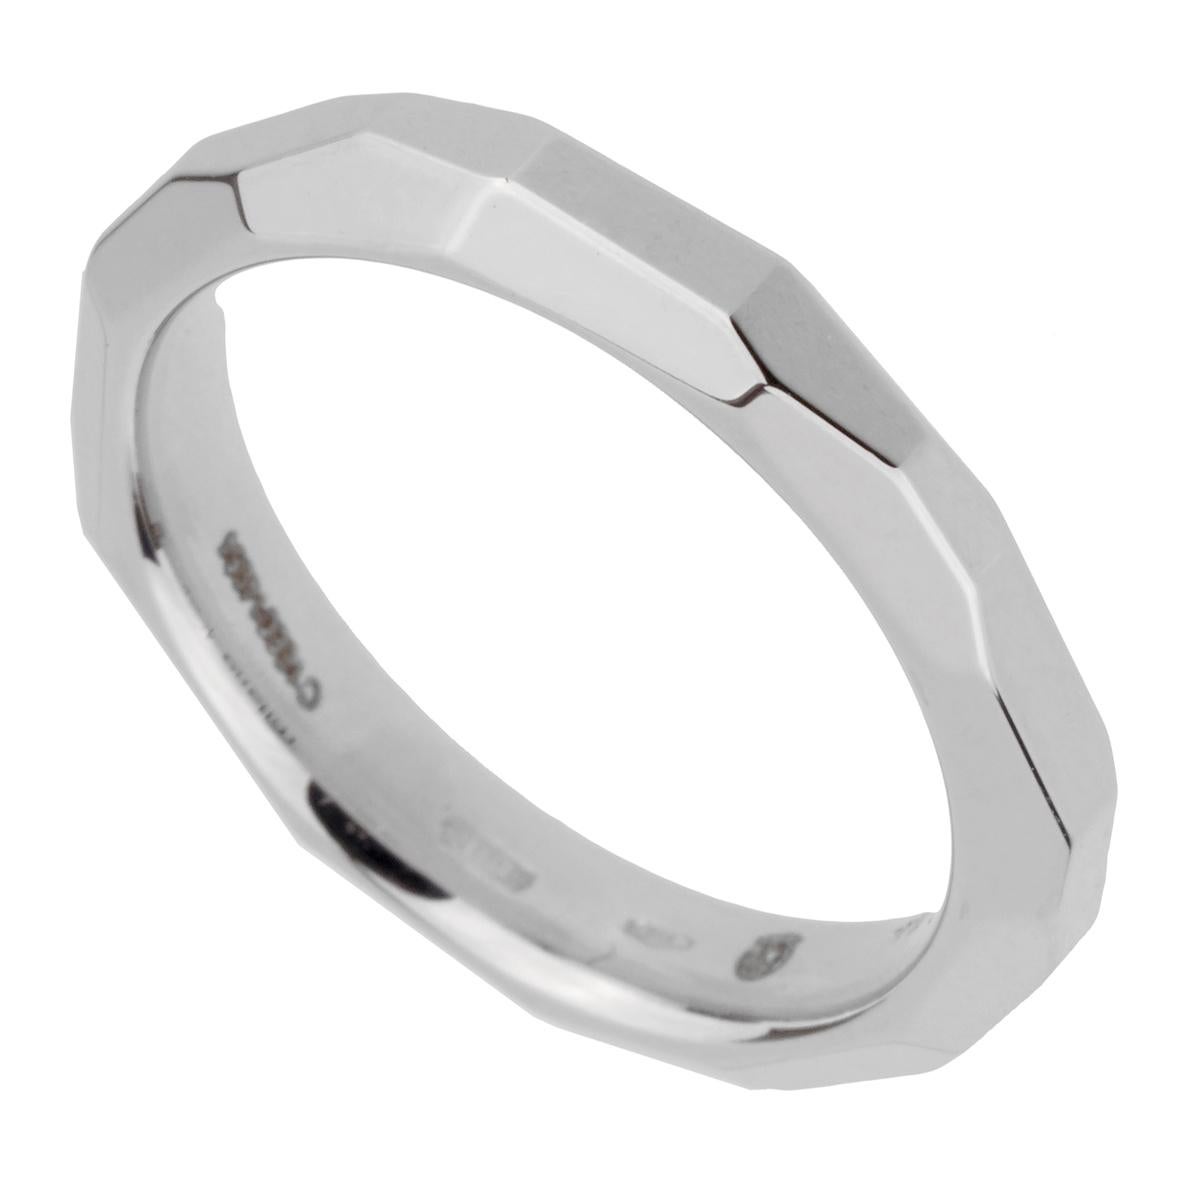 A chic white gold Pomellato band style ring crafted in 18k white gold, The ring measures a size 6.5 and can be resized.

Sku: 2389